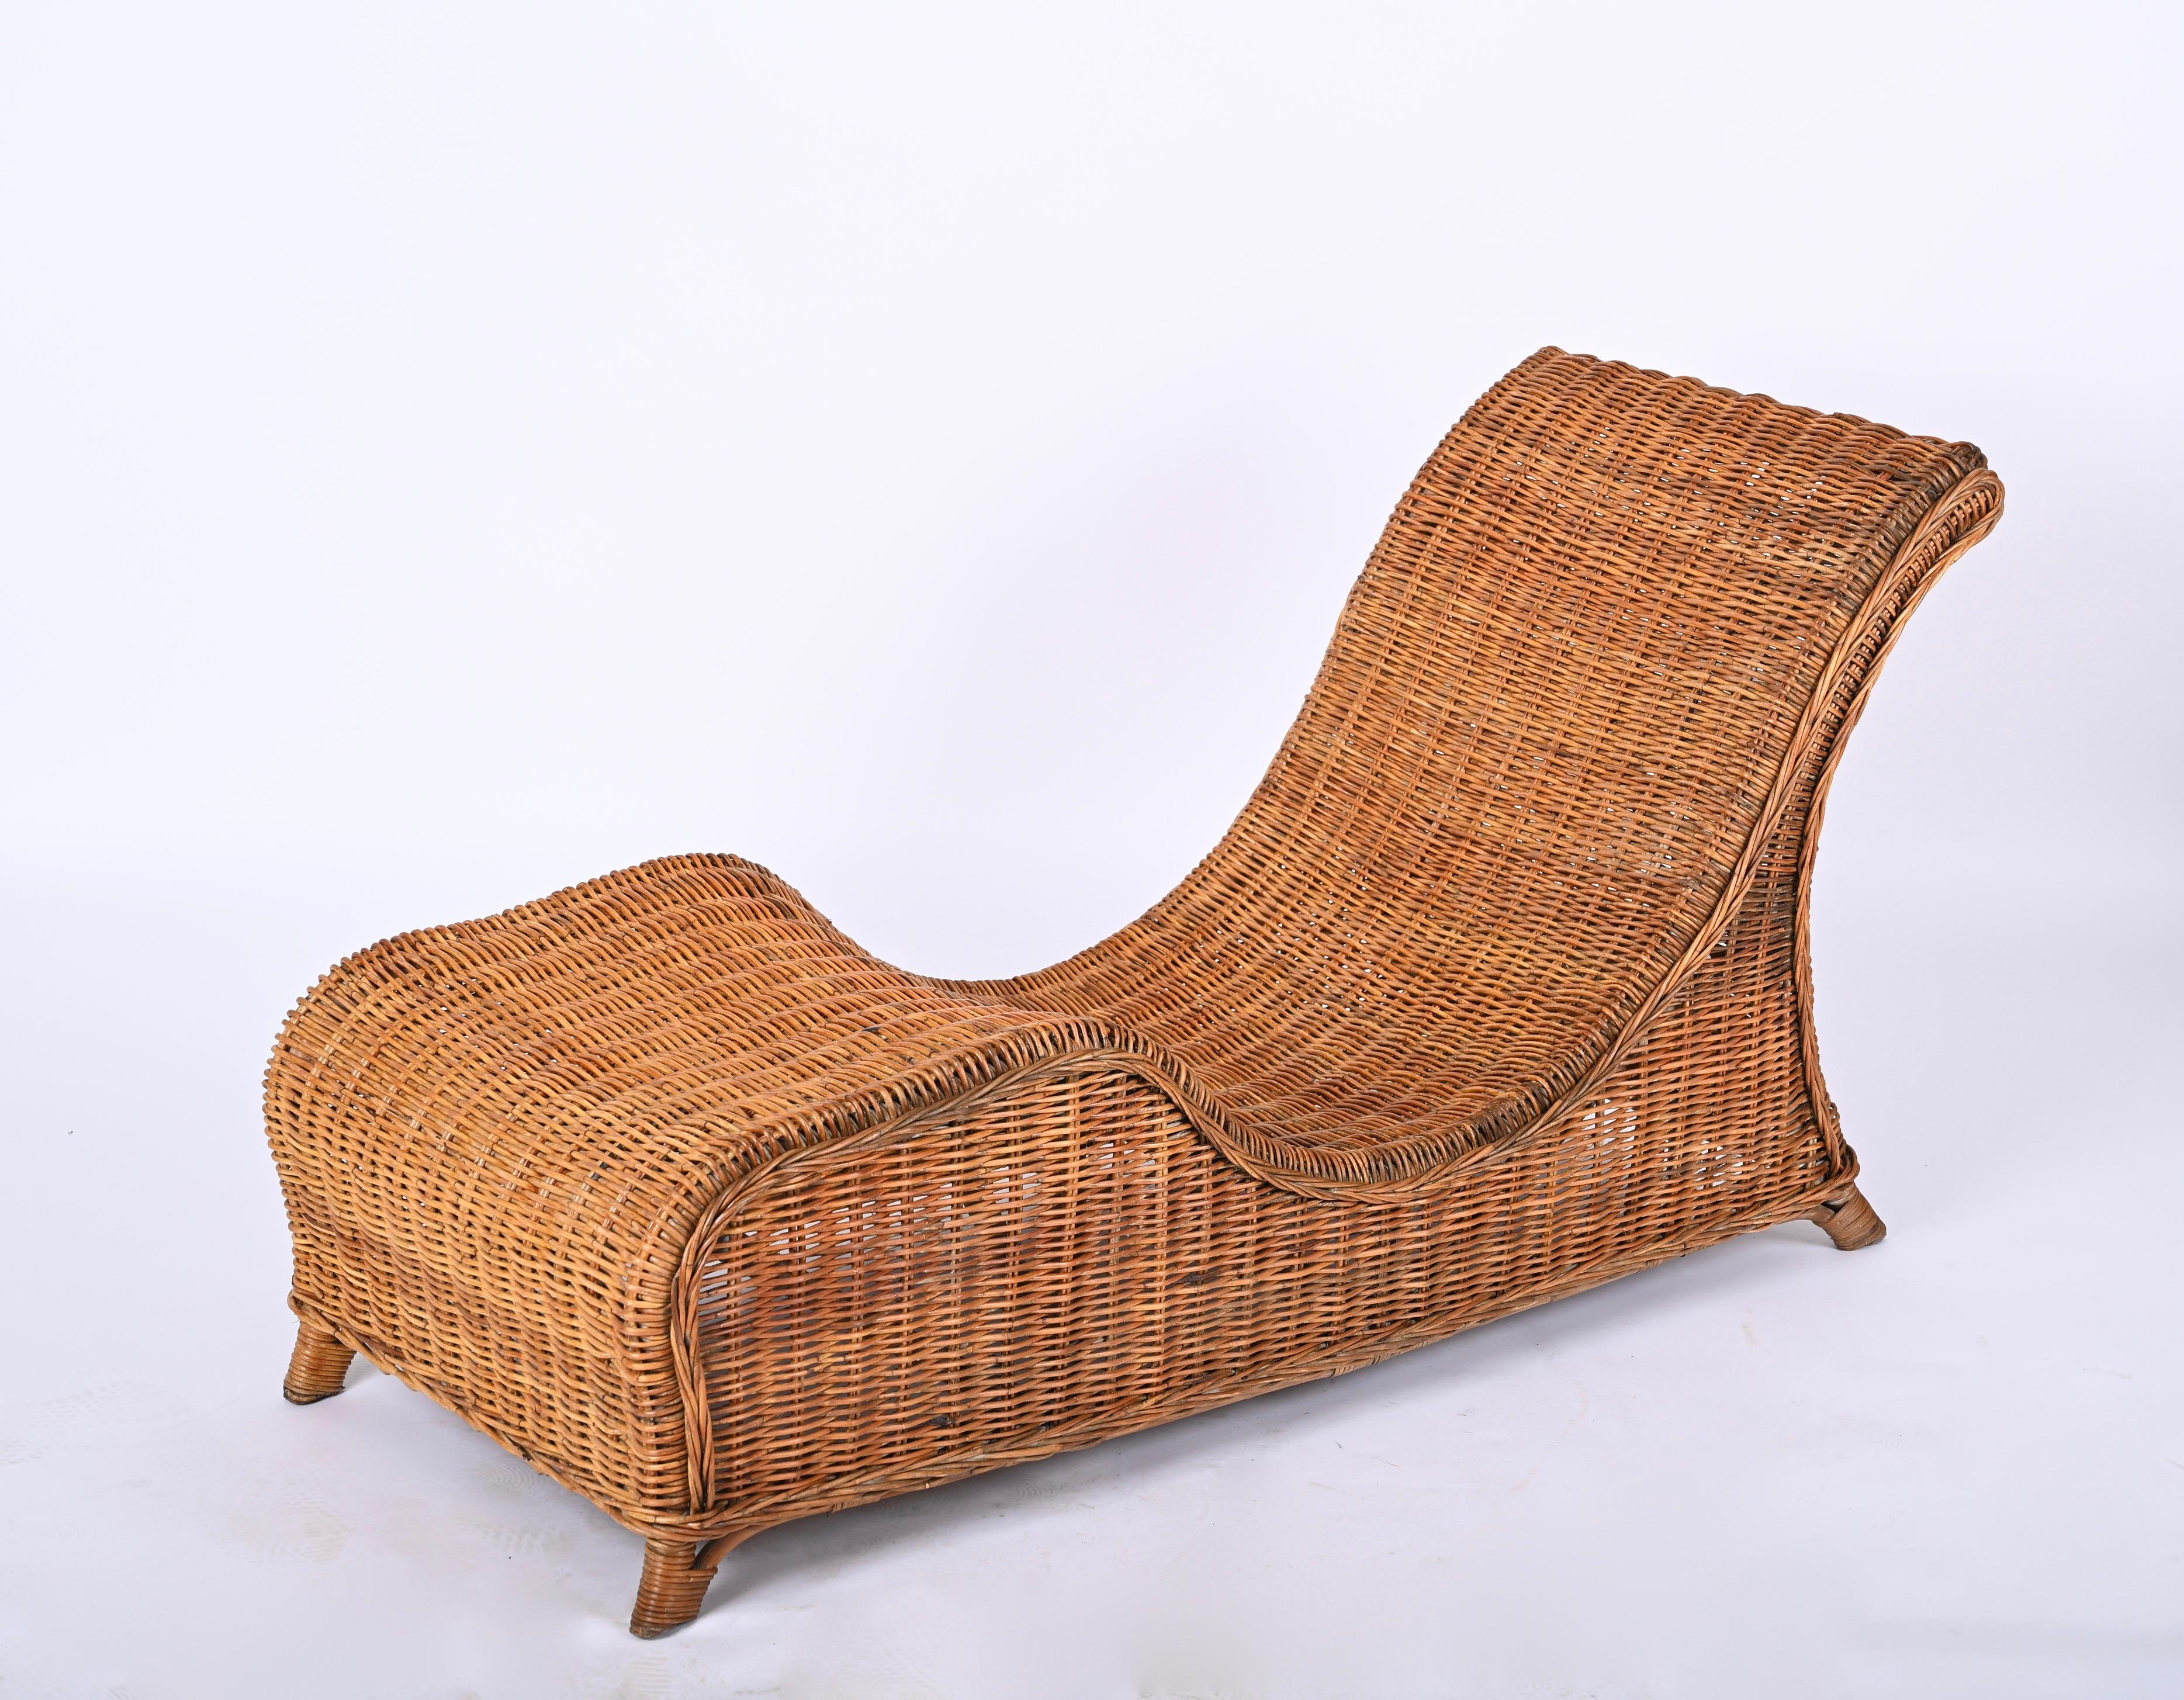 Midcentury Modern Bamboo and Wicker Italian Chaise Longue, 1960s For Sale 4